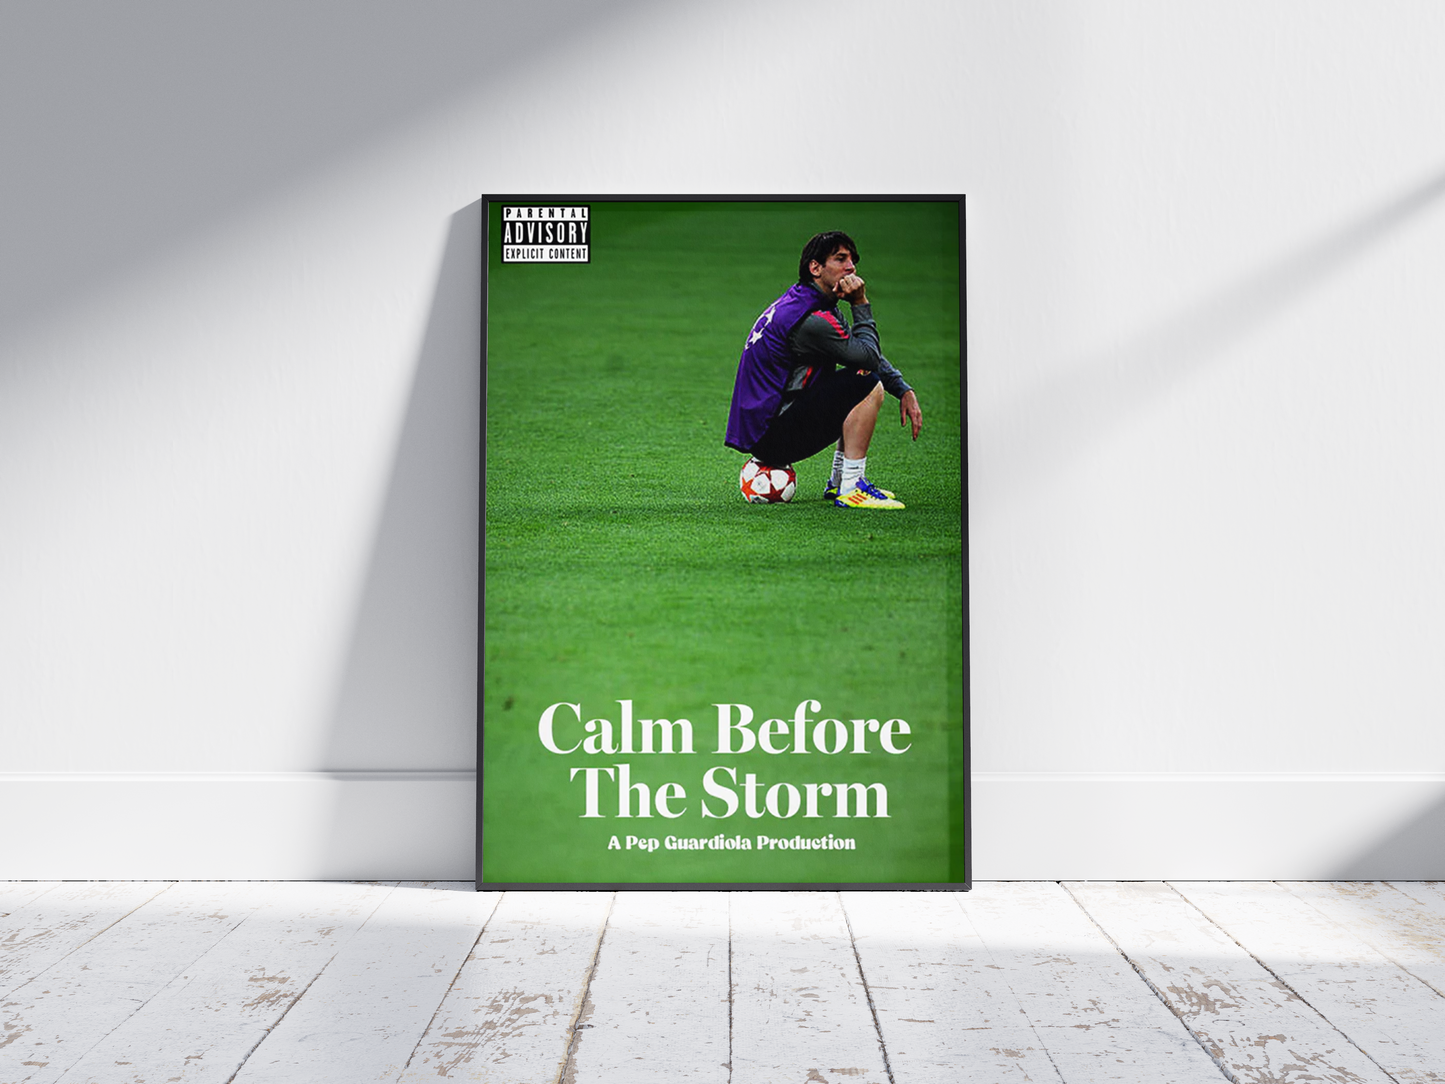 Messi: Calm Before The Storm